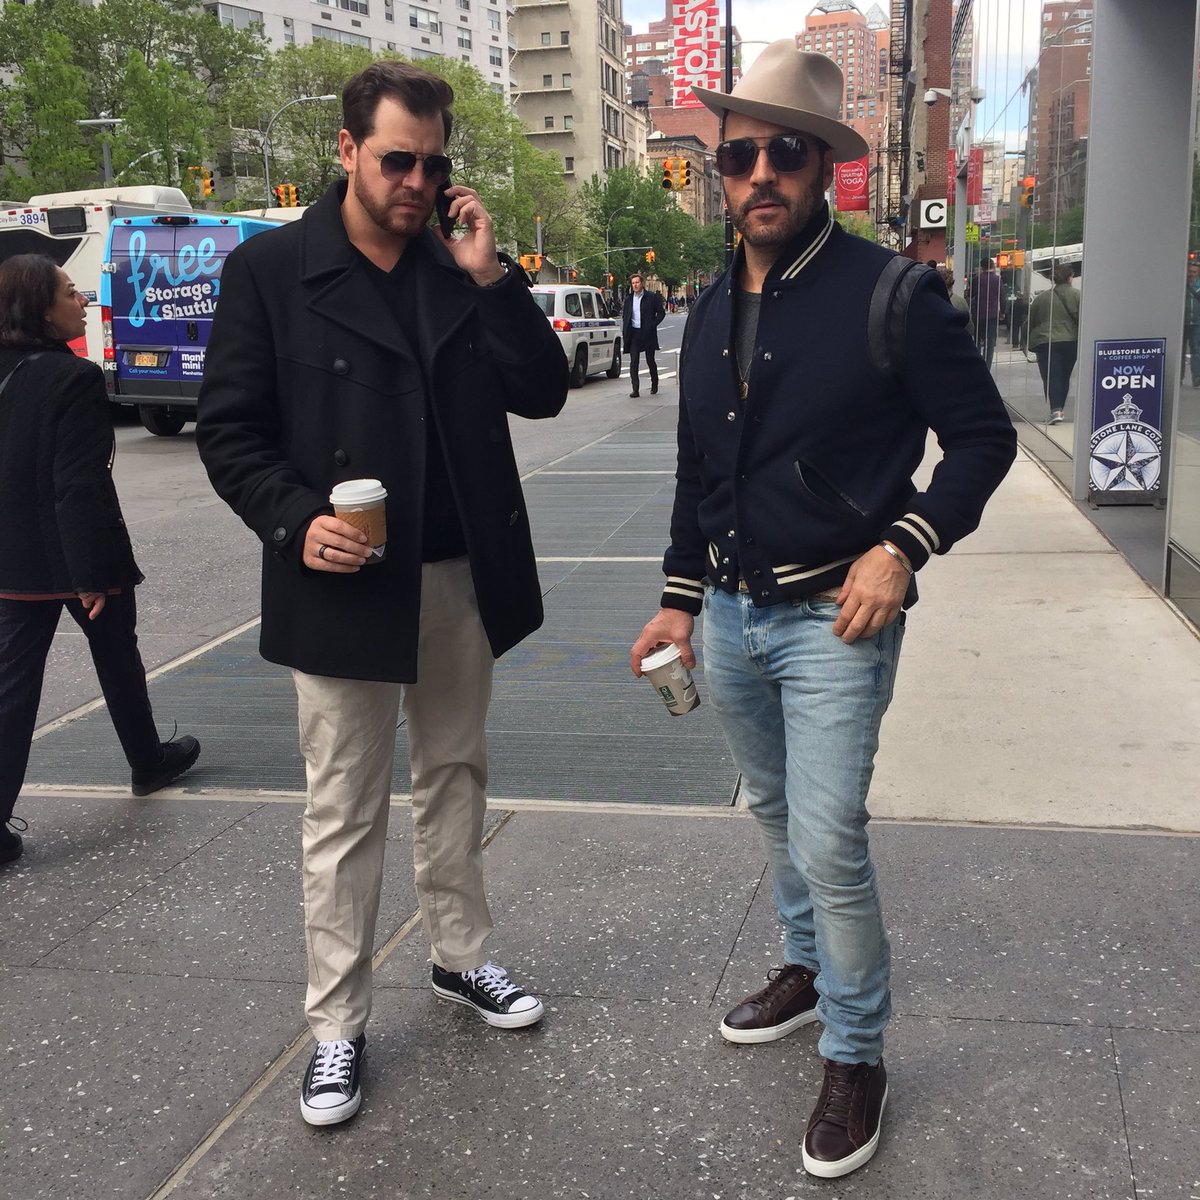 On the mean streets of NY with @DAVEOPHILLY in his usual position (rolling calls in a perplexed state ) https://t.co/cIhfwxFvDx